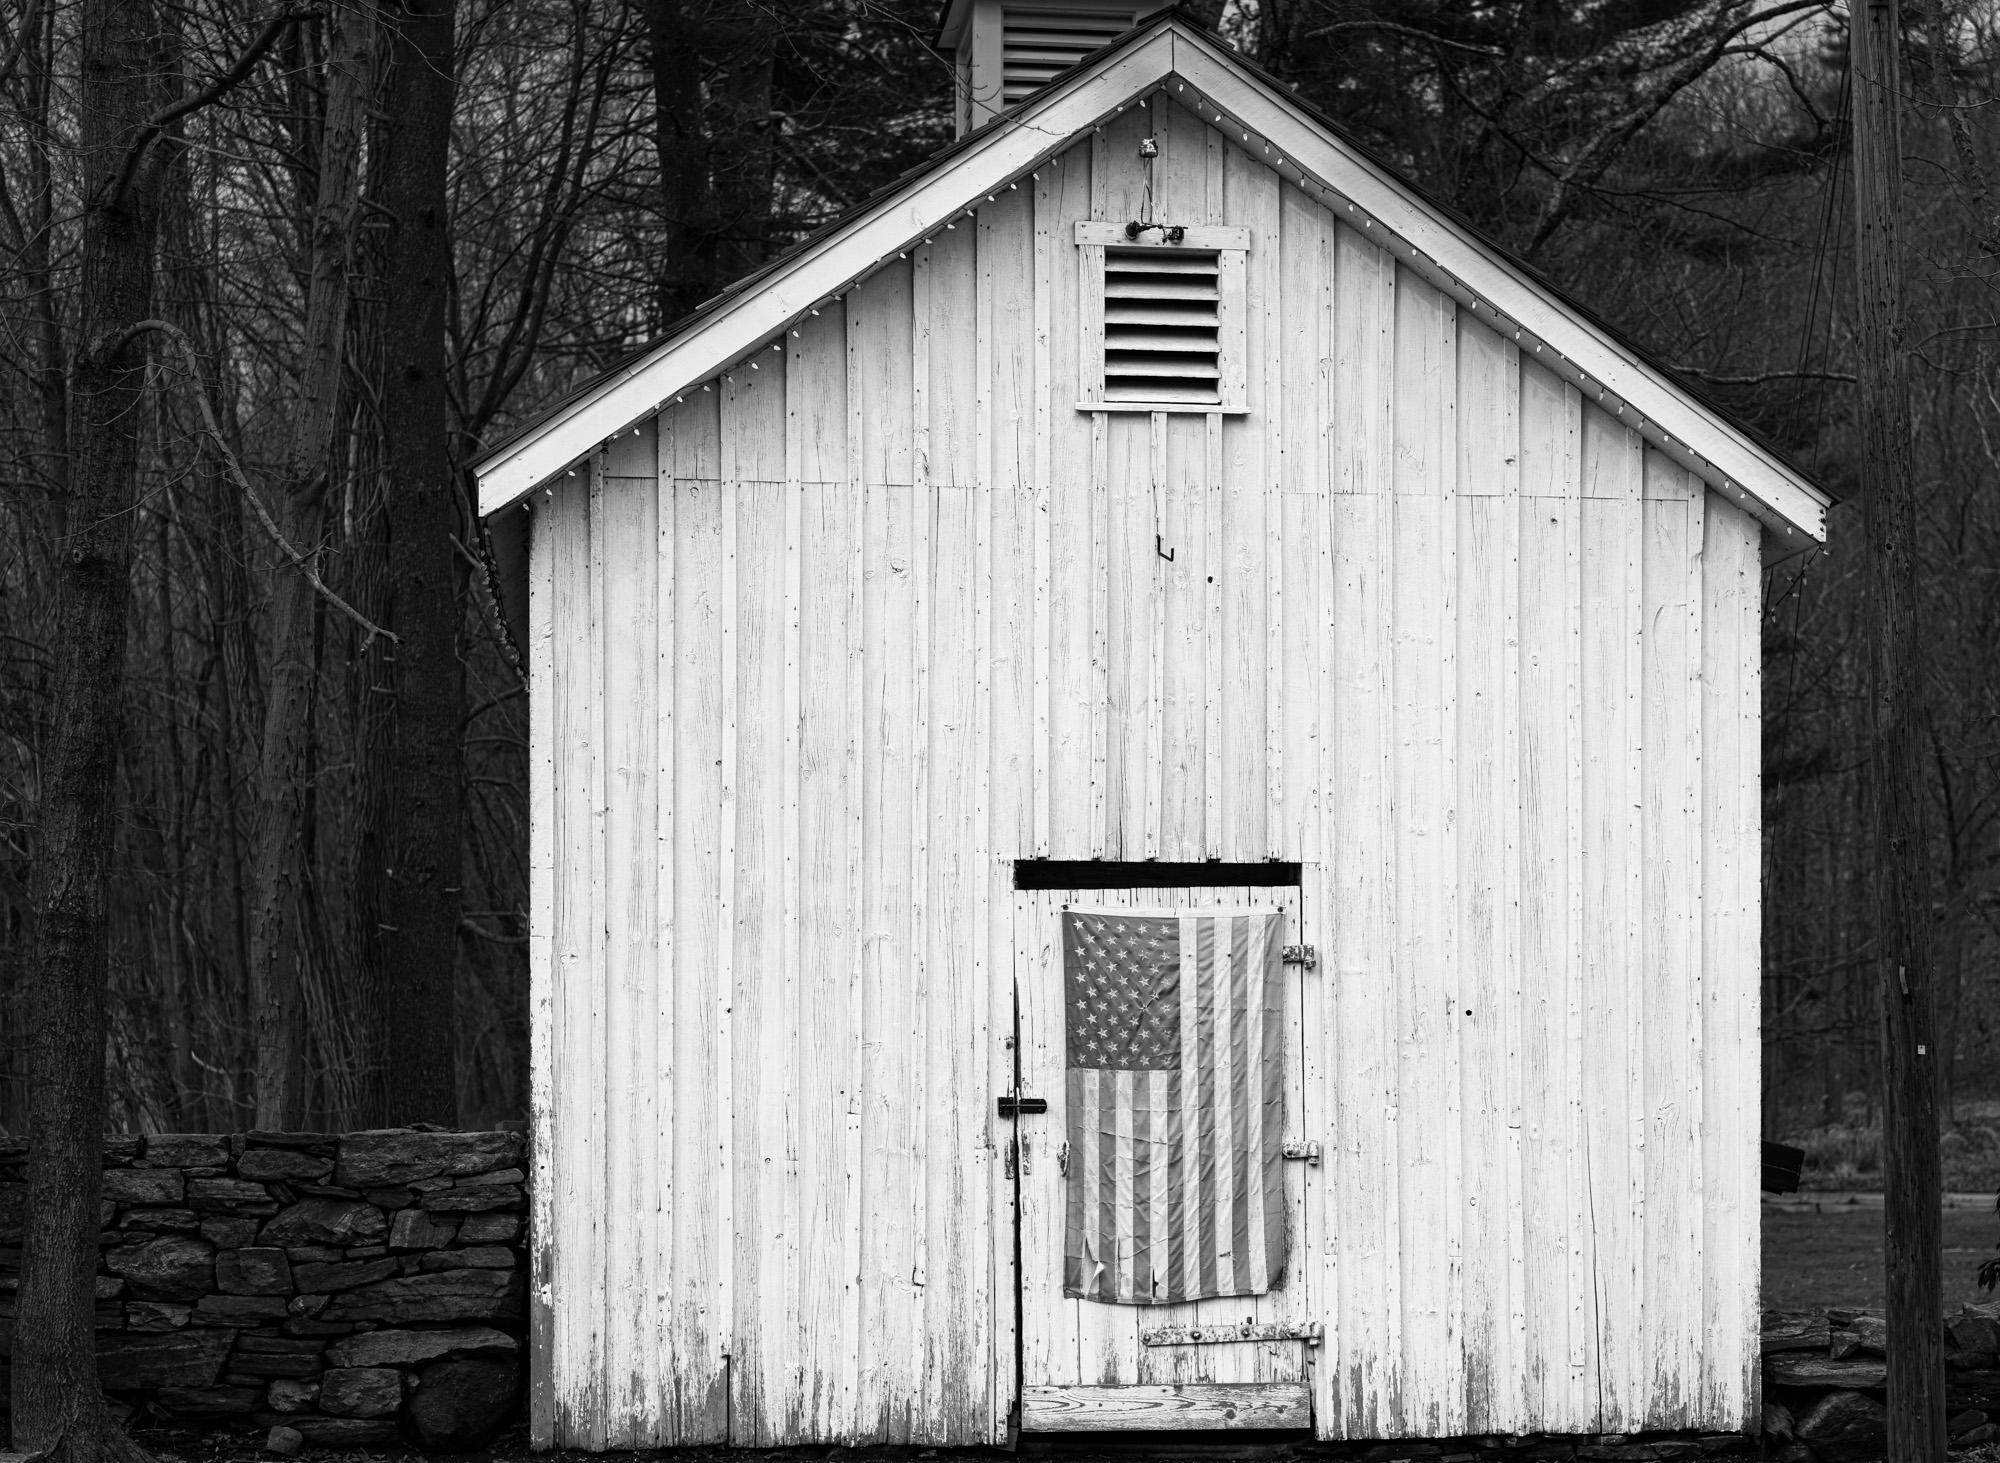  Limited Edition Black and White Photograph - "American Barn", 2022. The American flag has a variety  of symbolic meaning these days. This flag has seen better days but it matches the barn rather well.

About Howard Lewis:
Lewis’ artistic practice